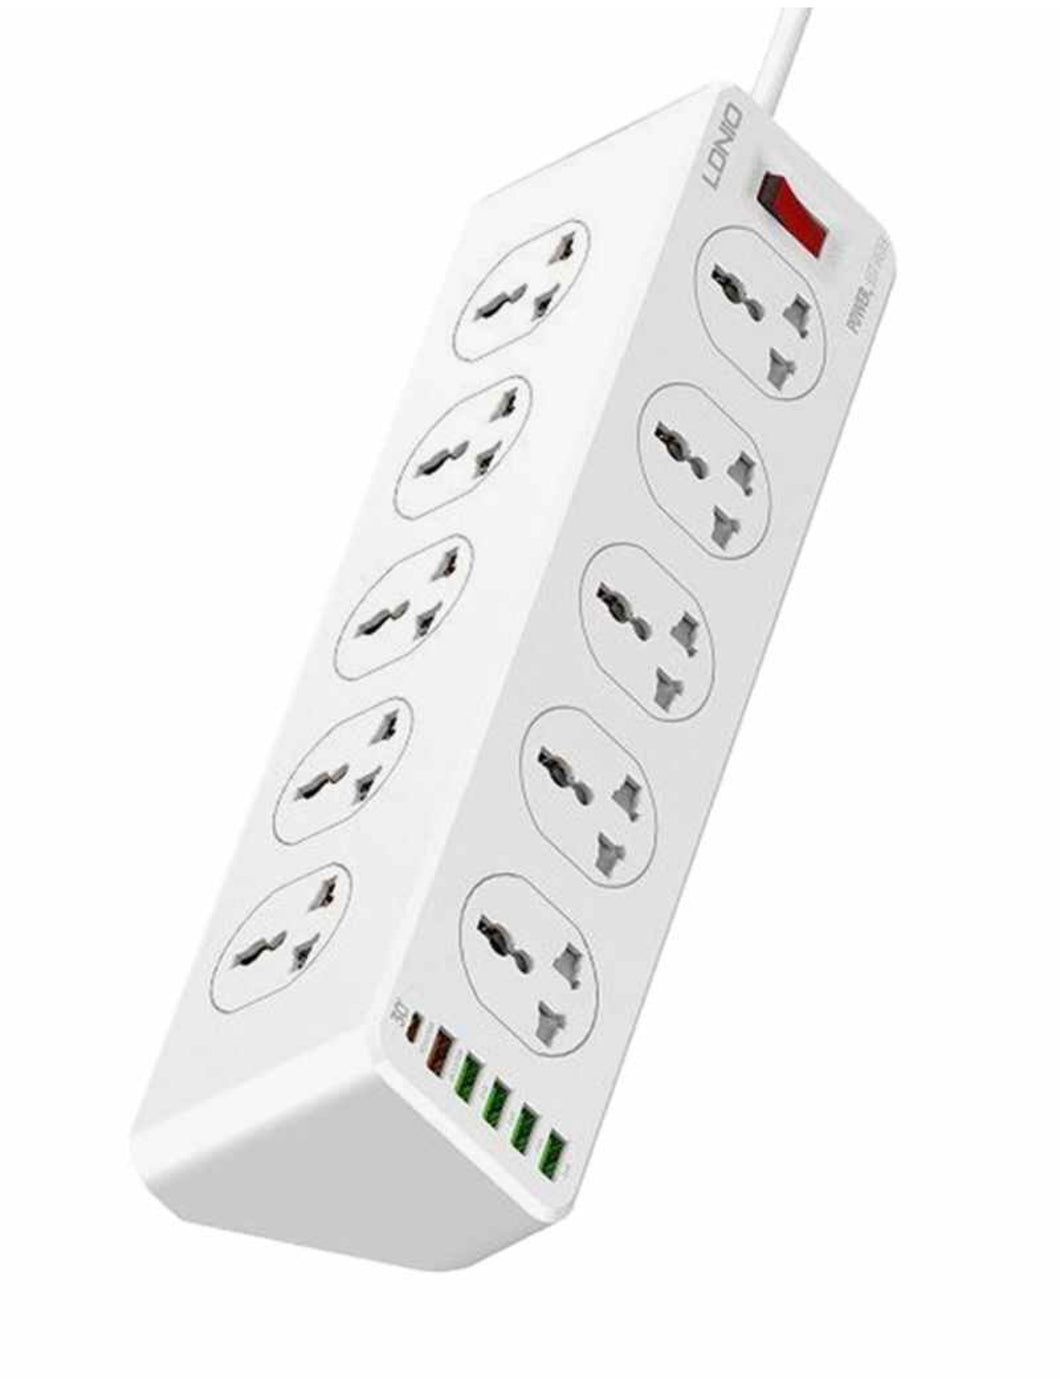 LDNIO 10 power socket , 6 charger port